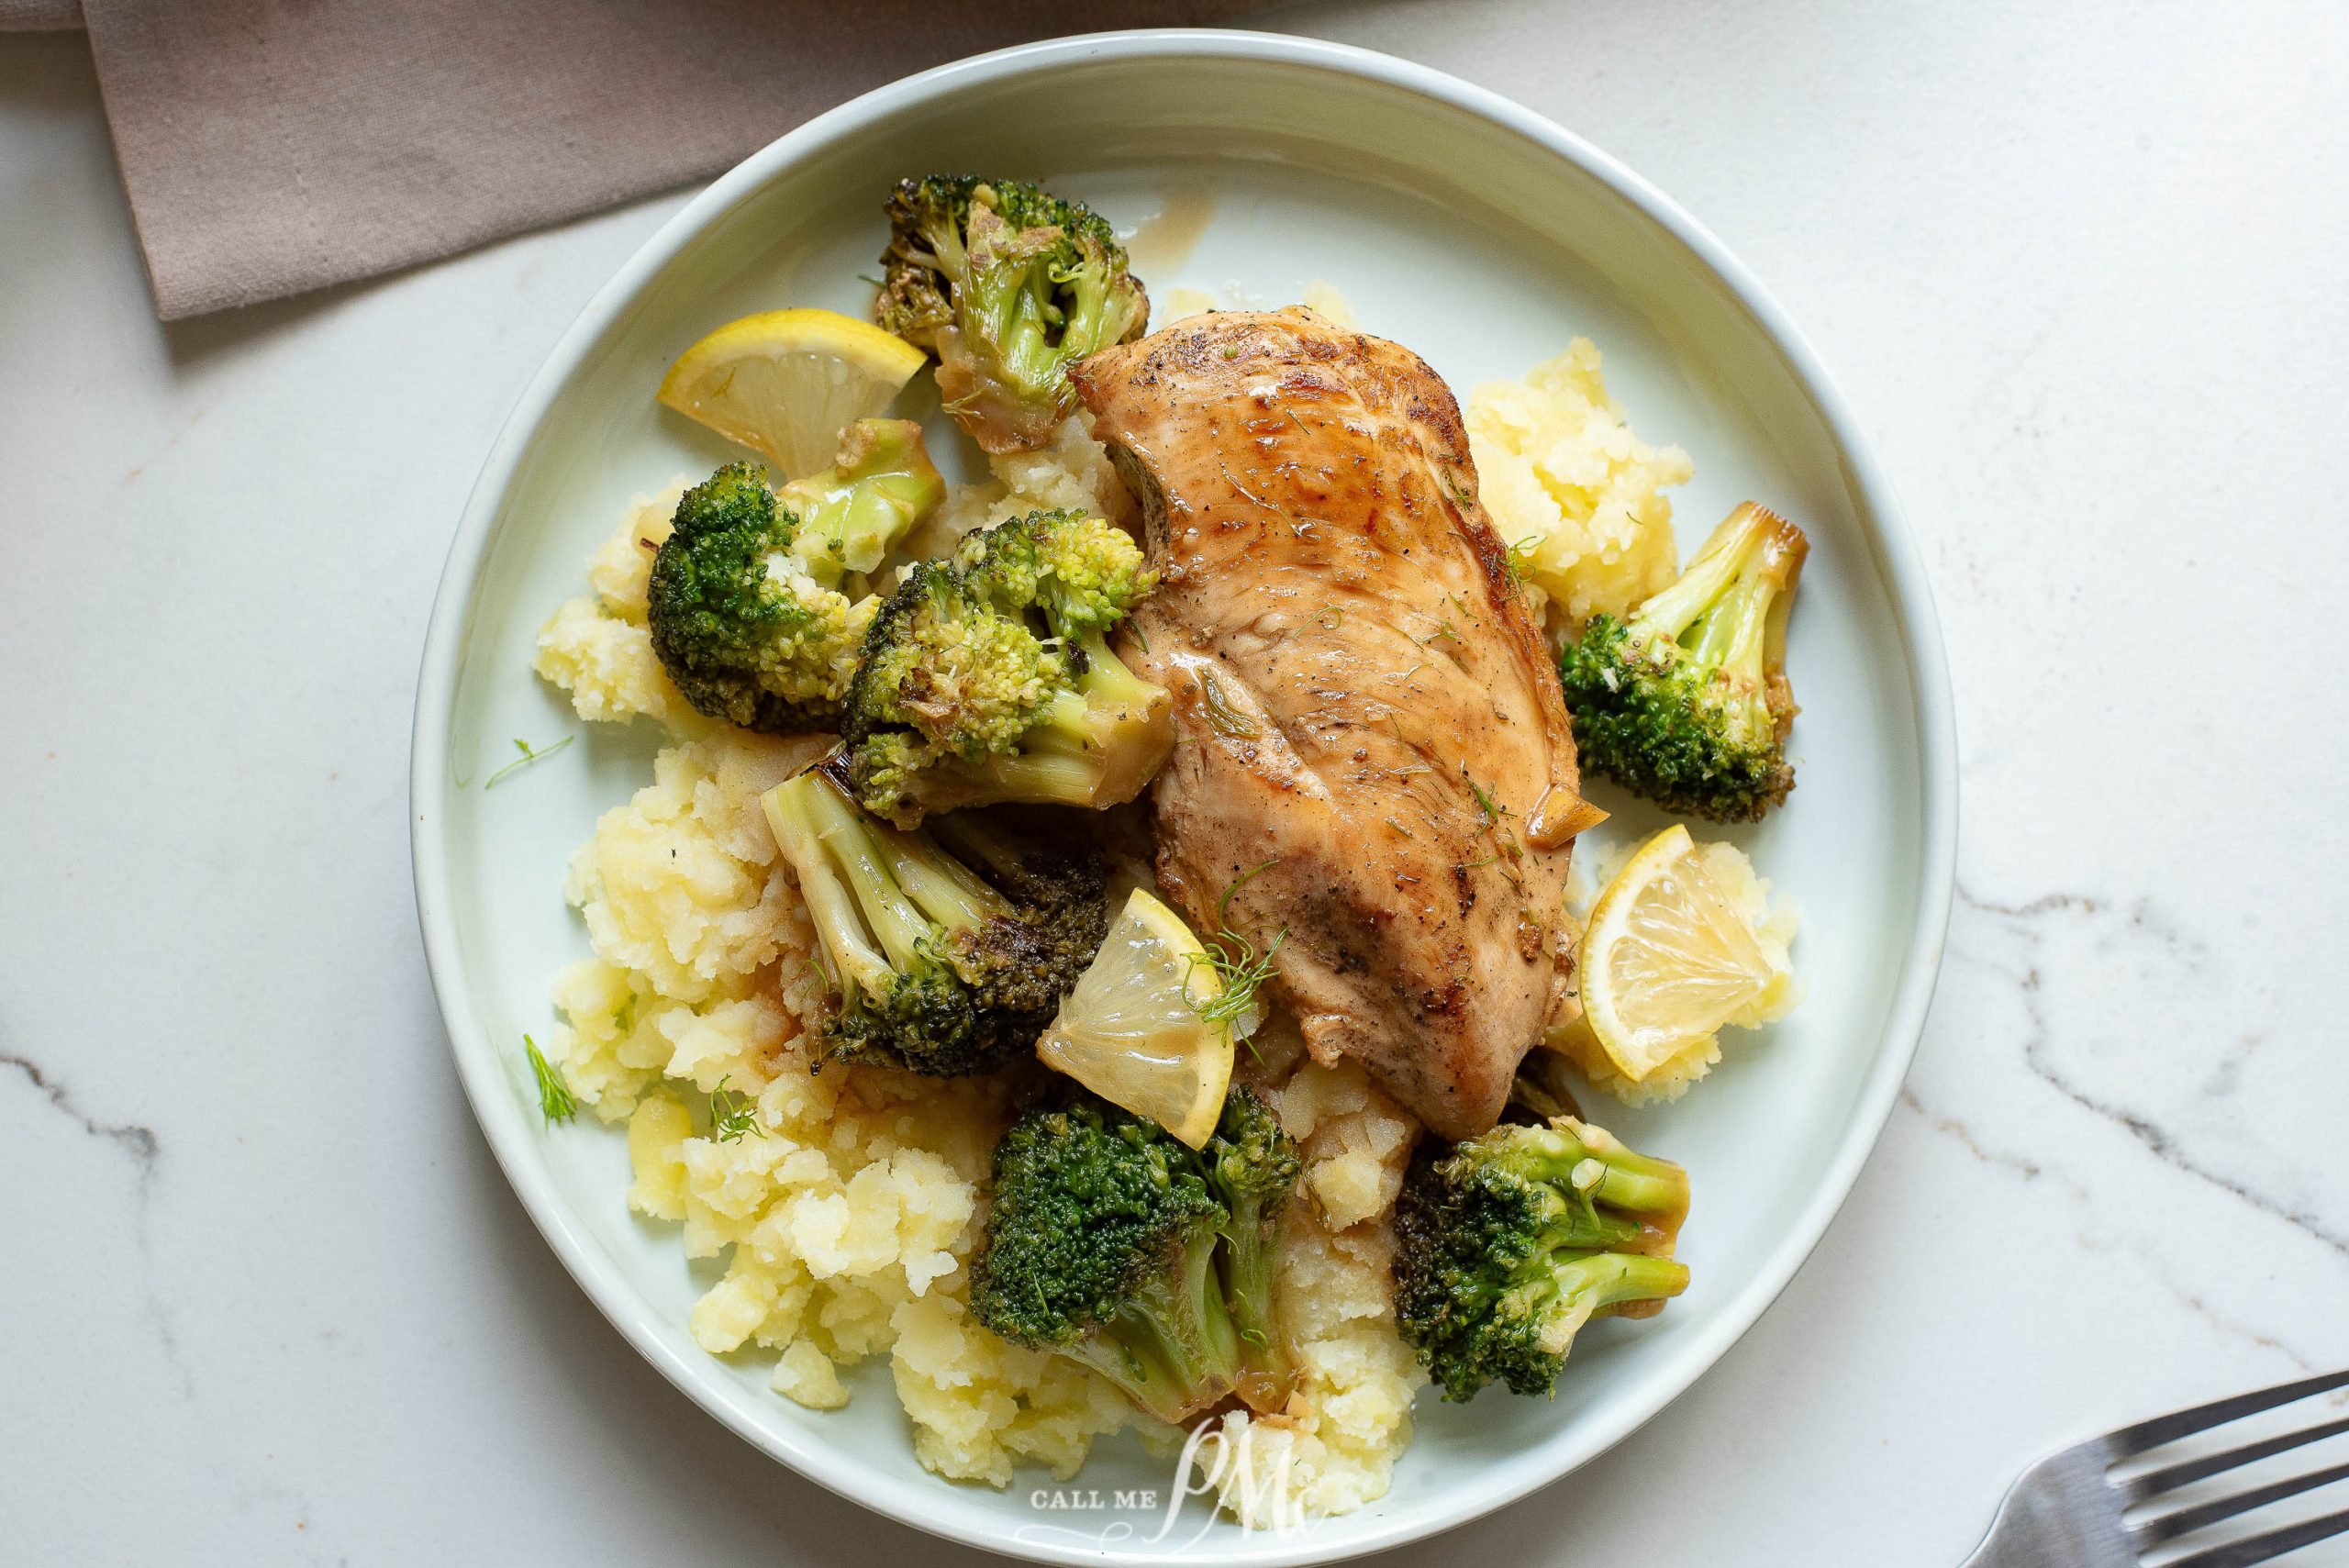 A plate with chicken, broccoli and mashed potatoes.